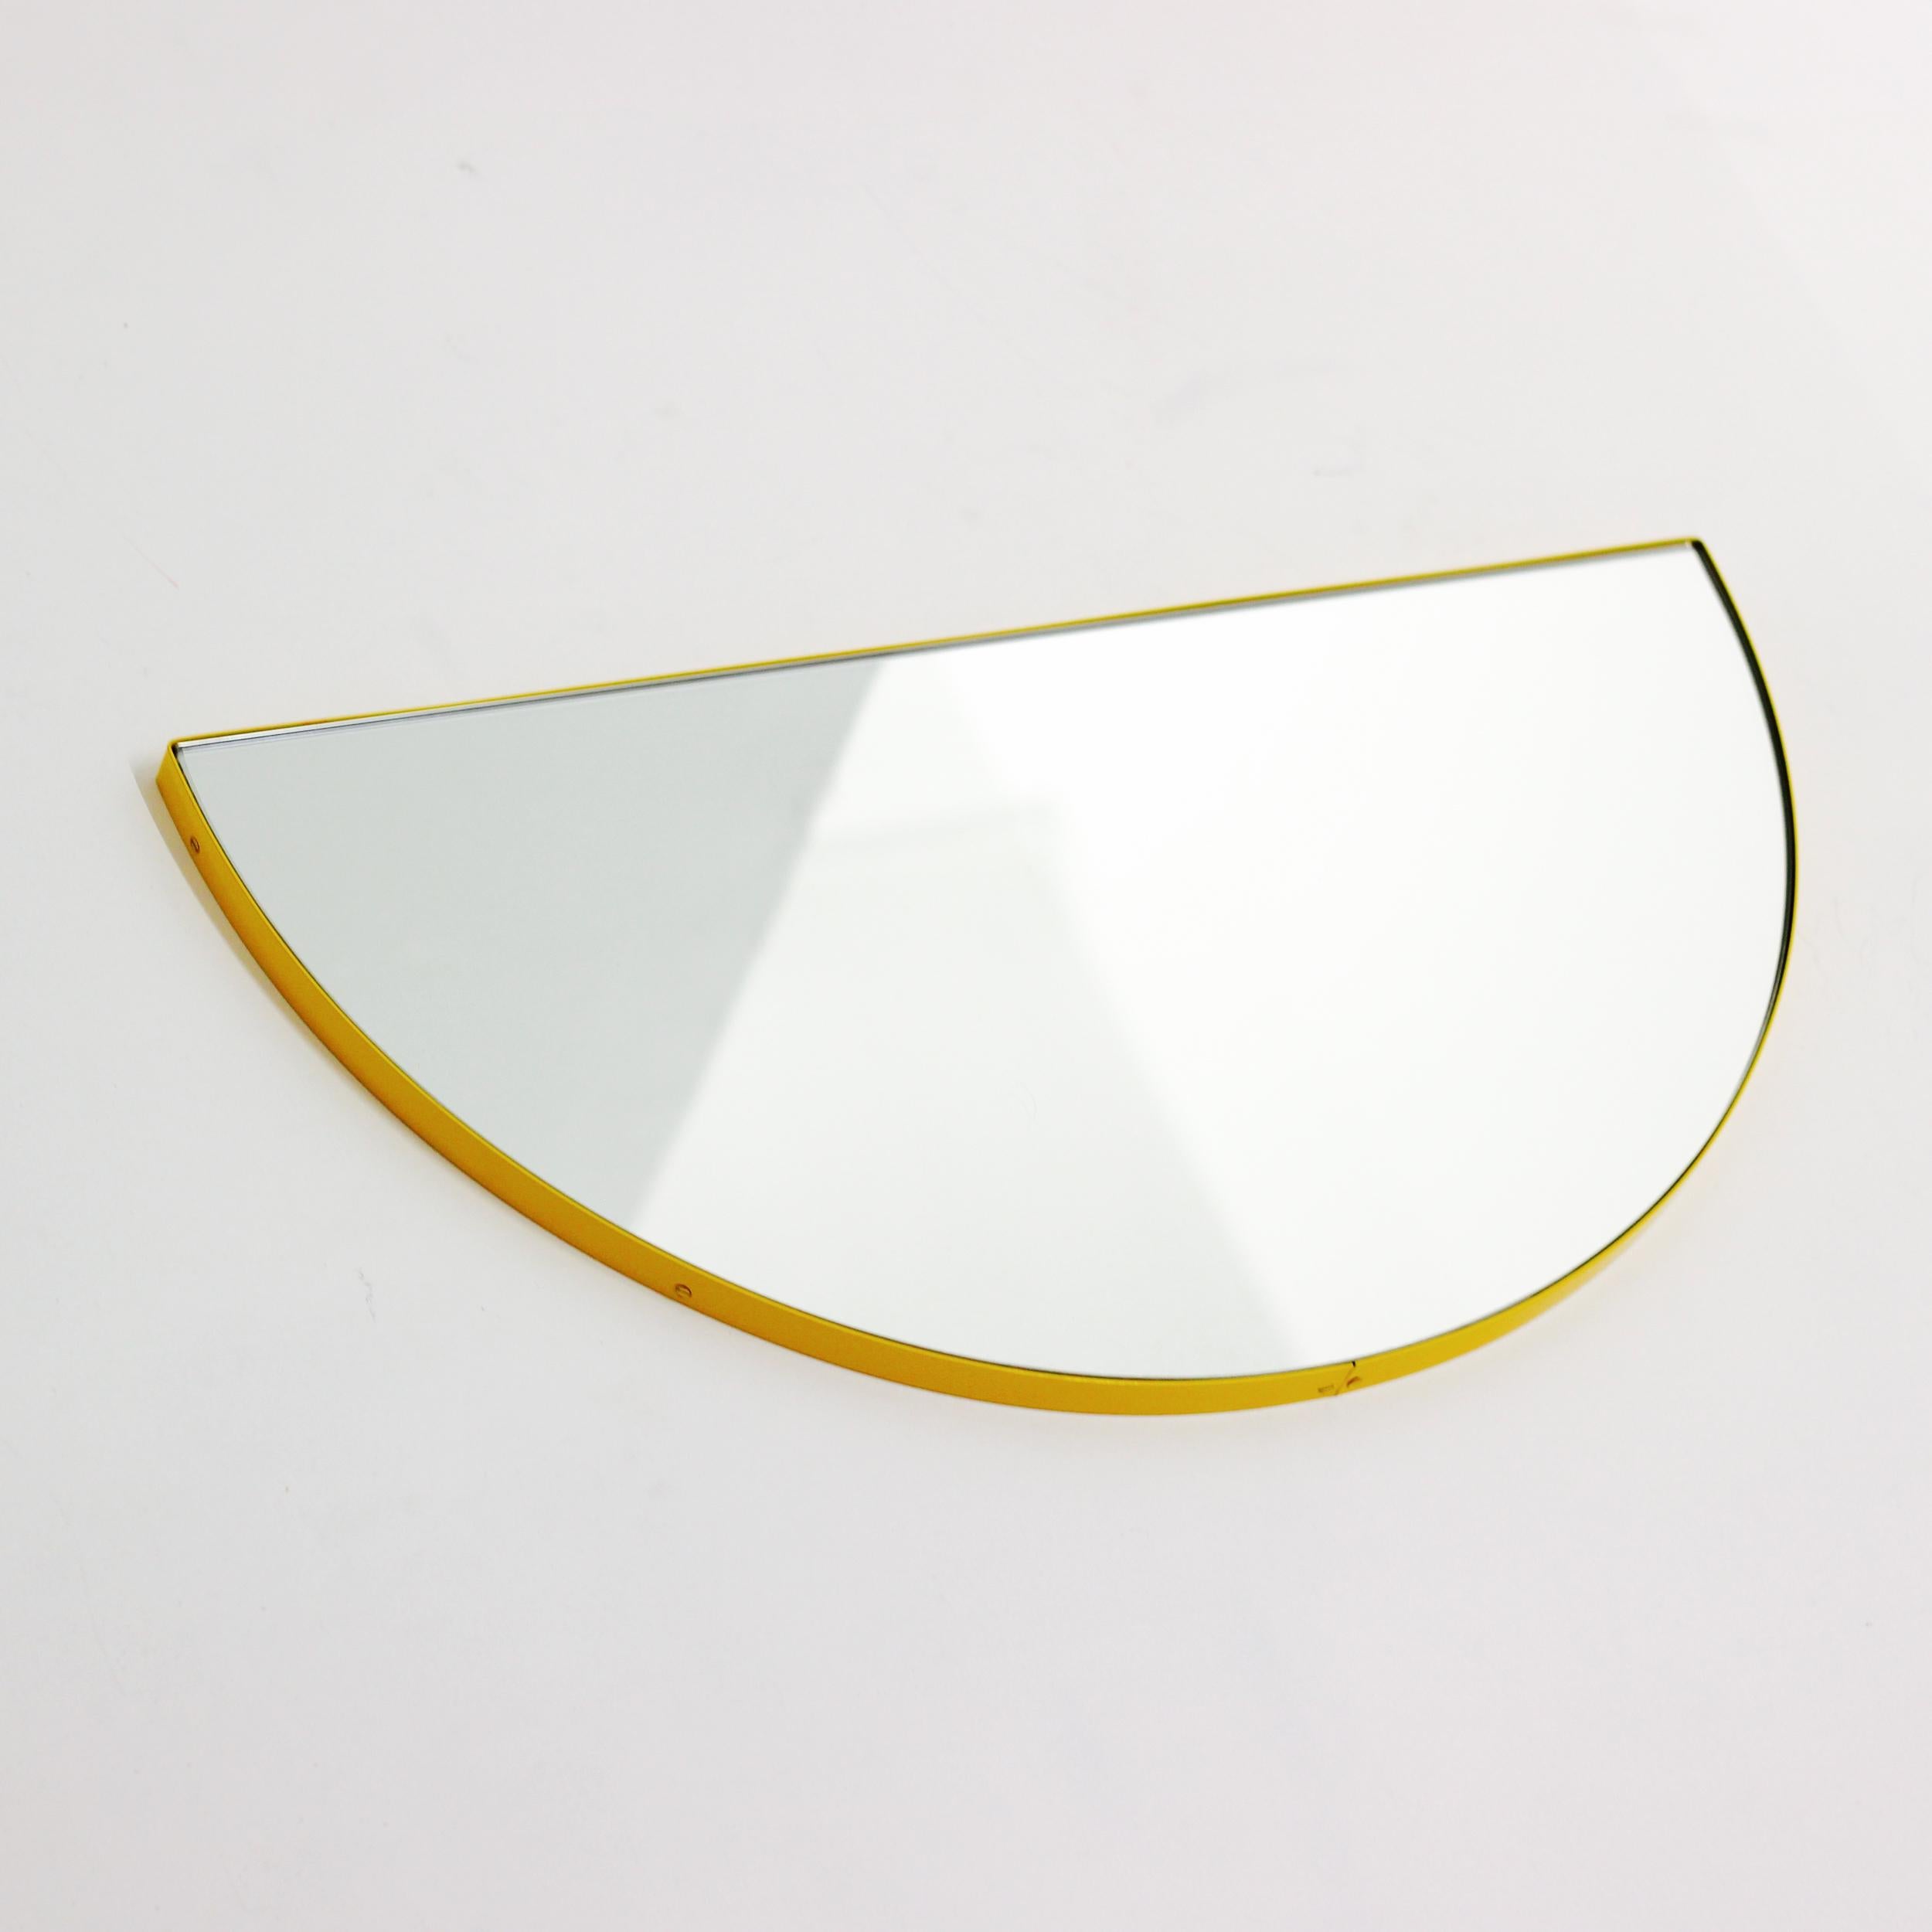 Original and minimalist half-moon mirror with a modern aluminium powder coated frame. Designed and made in London, UK.
 
Fitted with an ingenious French cleat (split batten) system so that the mirror may hang flush with the wall in four possible